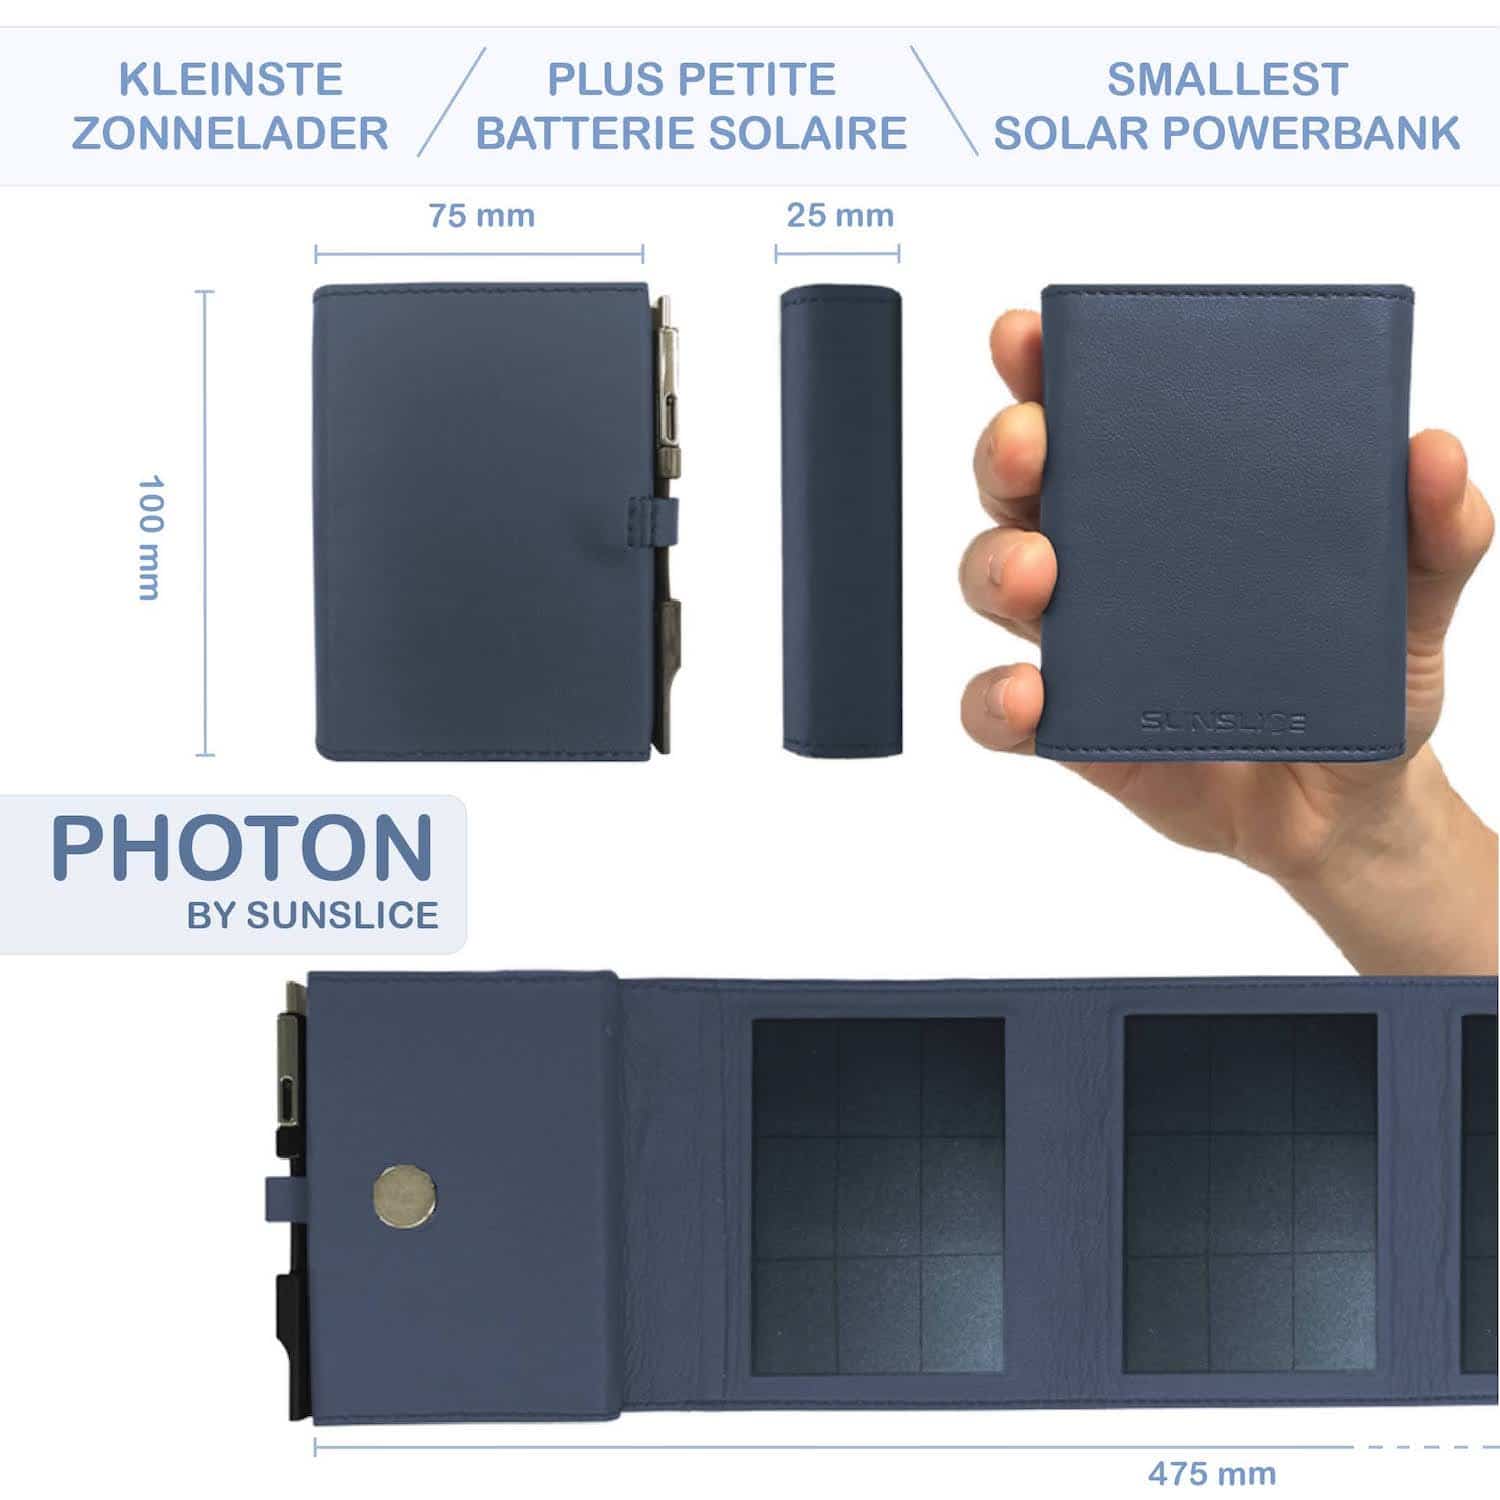 photon bleu solar charger power bank with views from all angles and dimensions